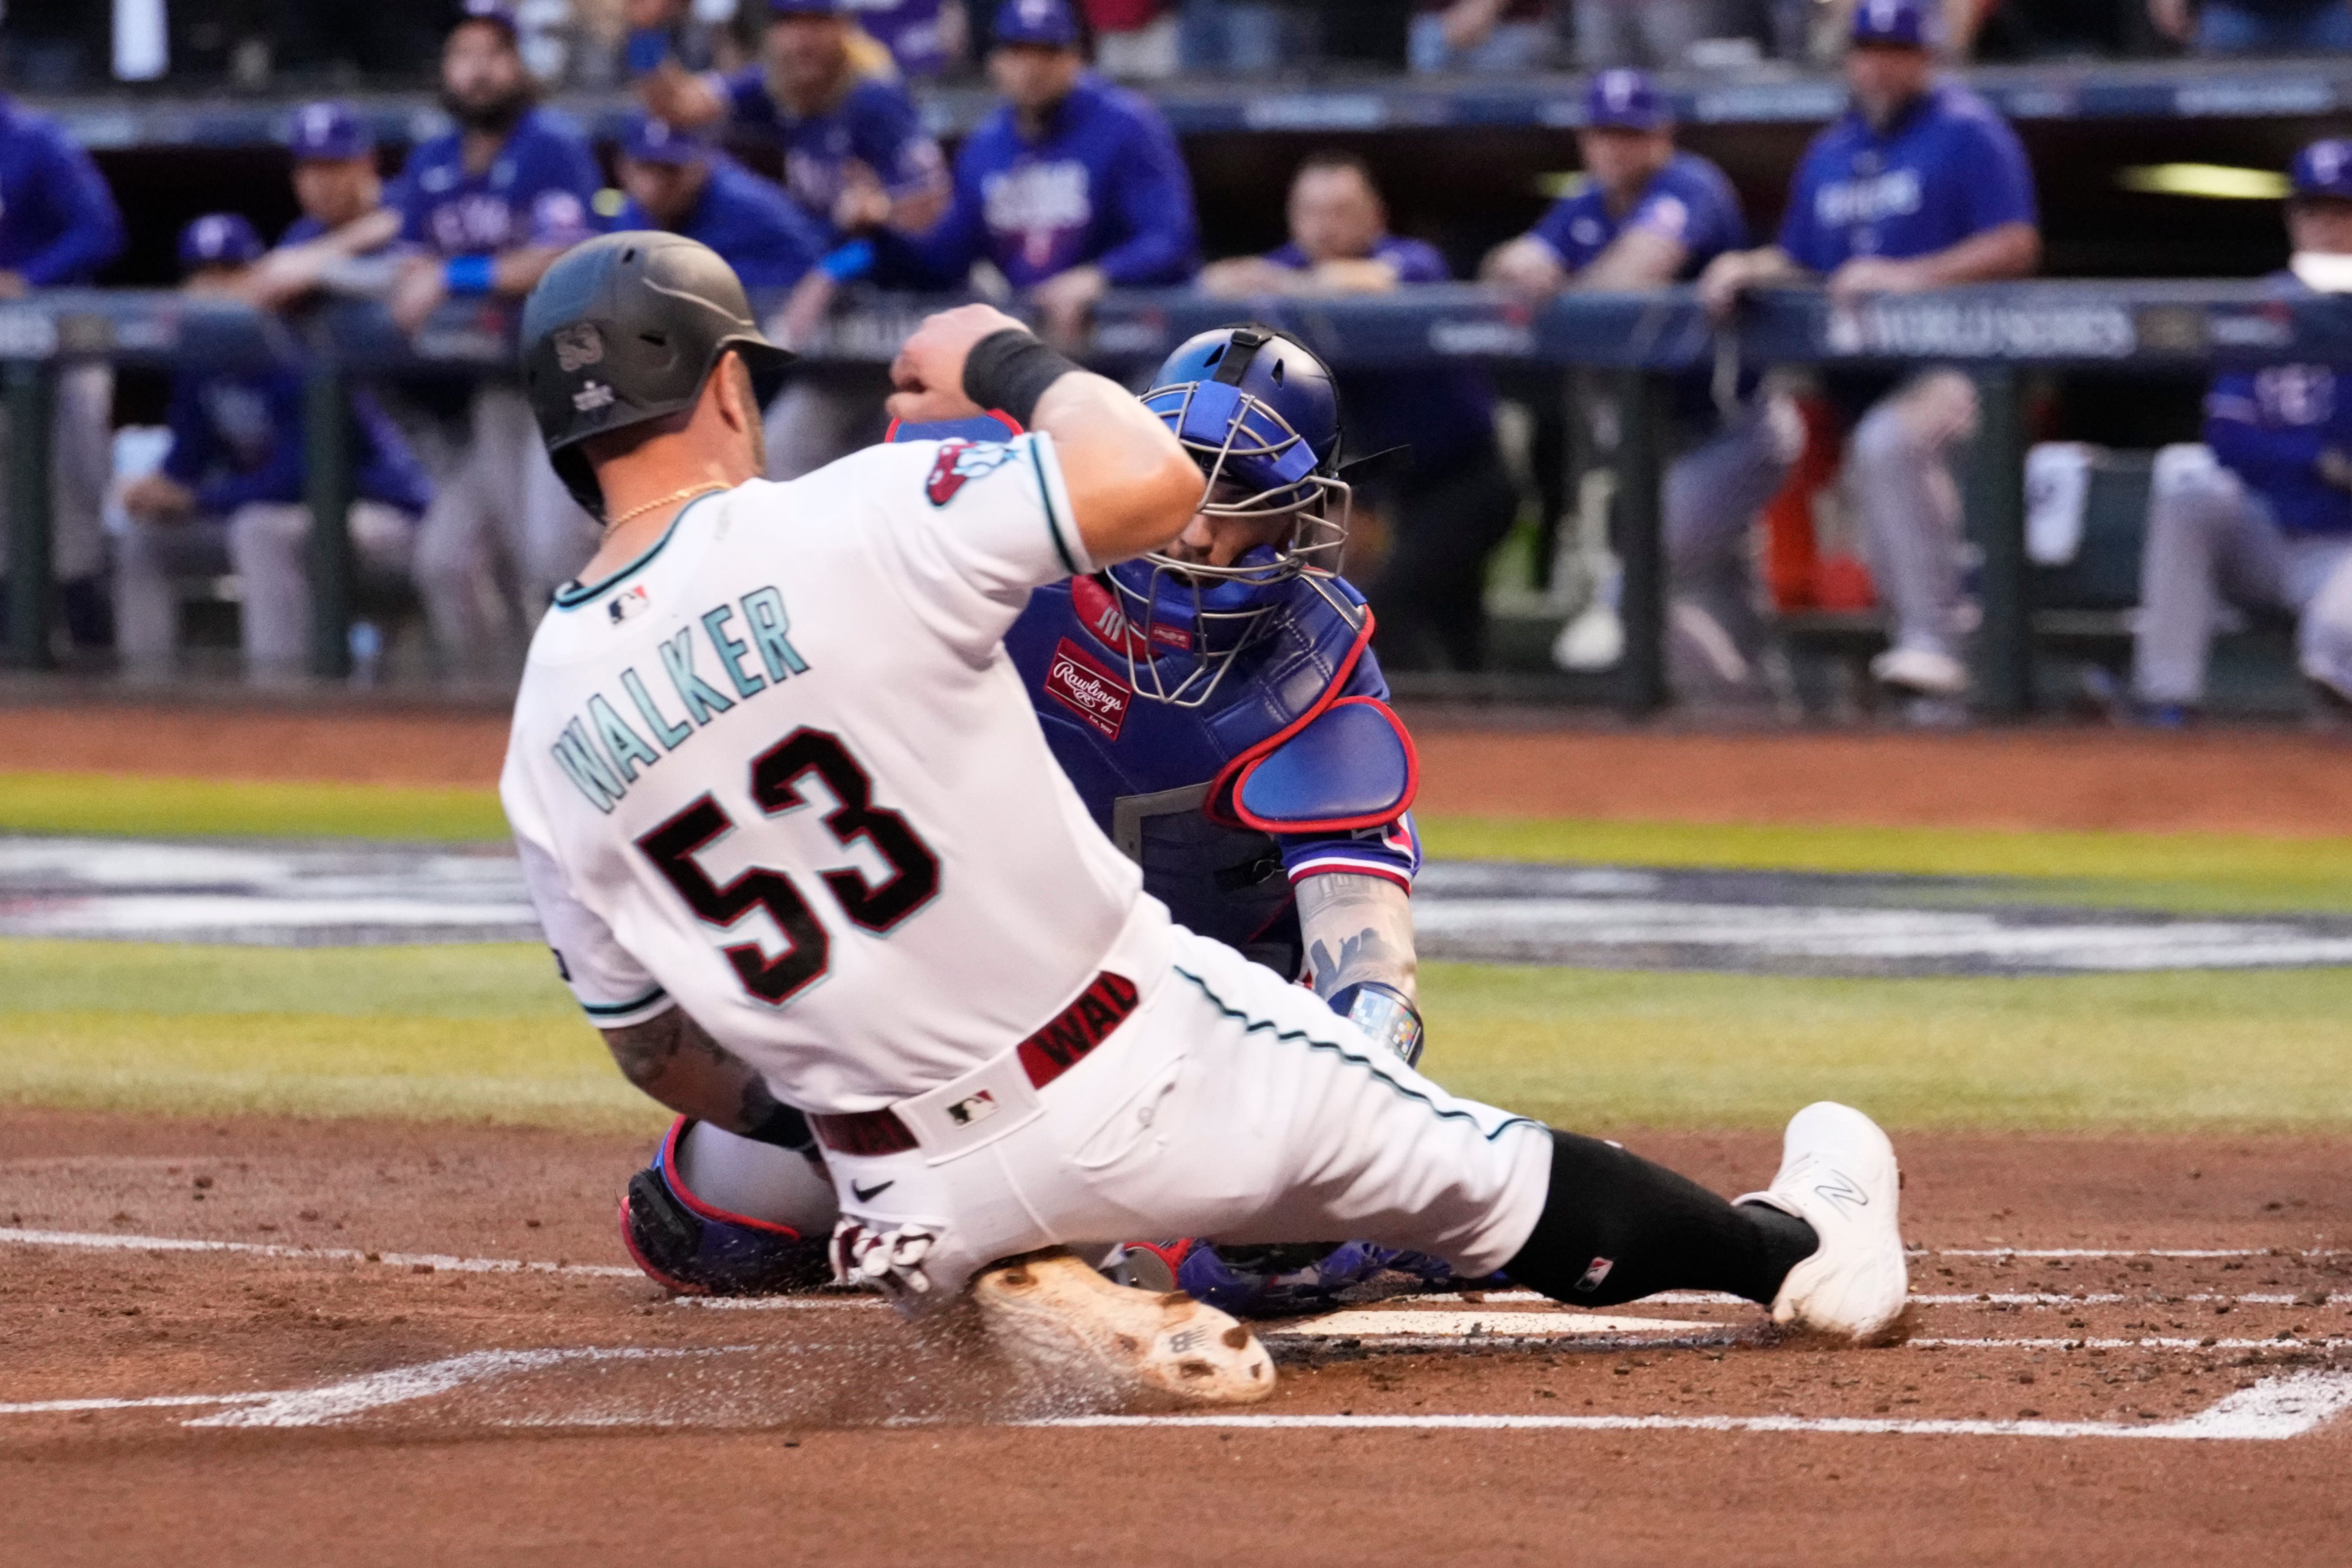 Arizona Diamondbacks first baseman Christian Walker is tagged out at home plate by Texas Rangers catcher Jonah Heim during the second inning in Game 3 of the World Series at Chase Field.